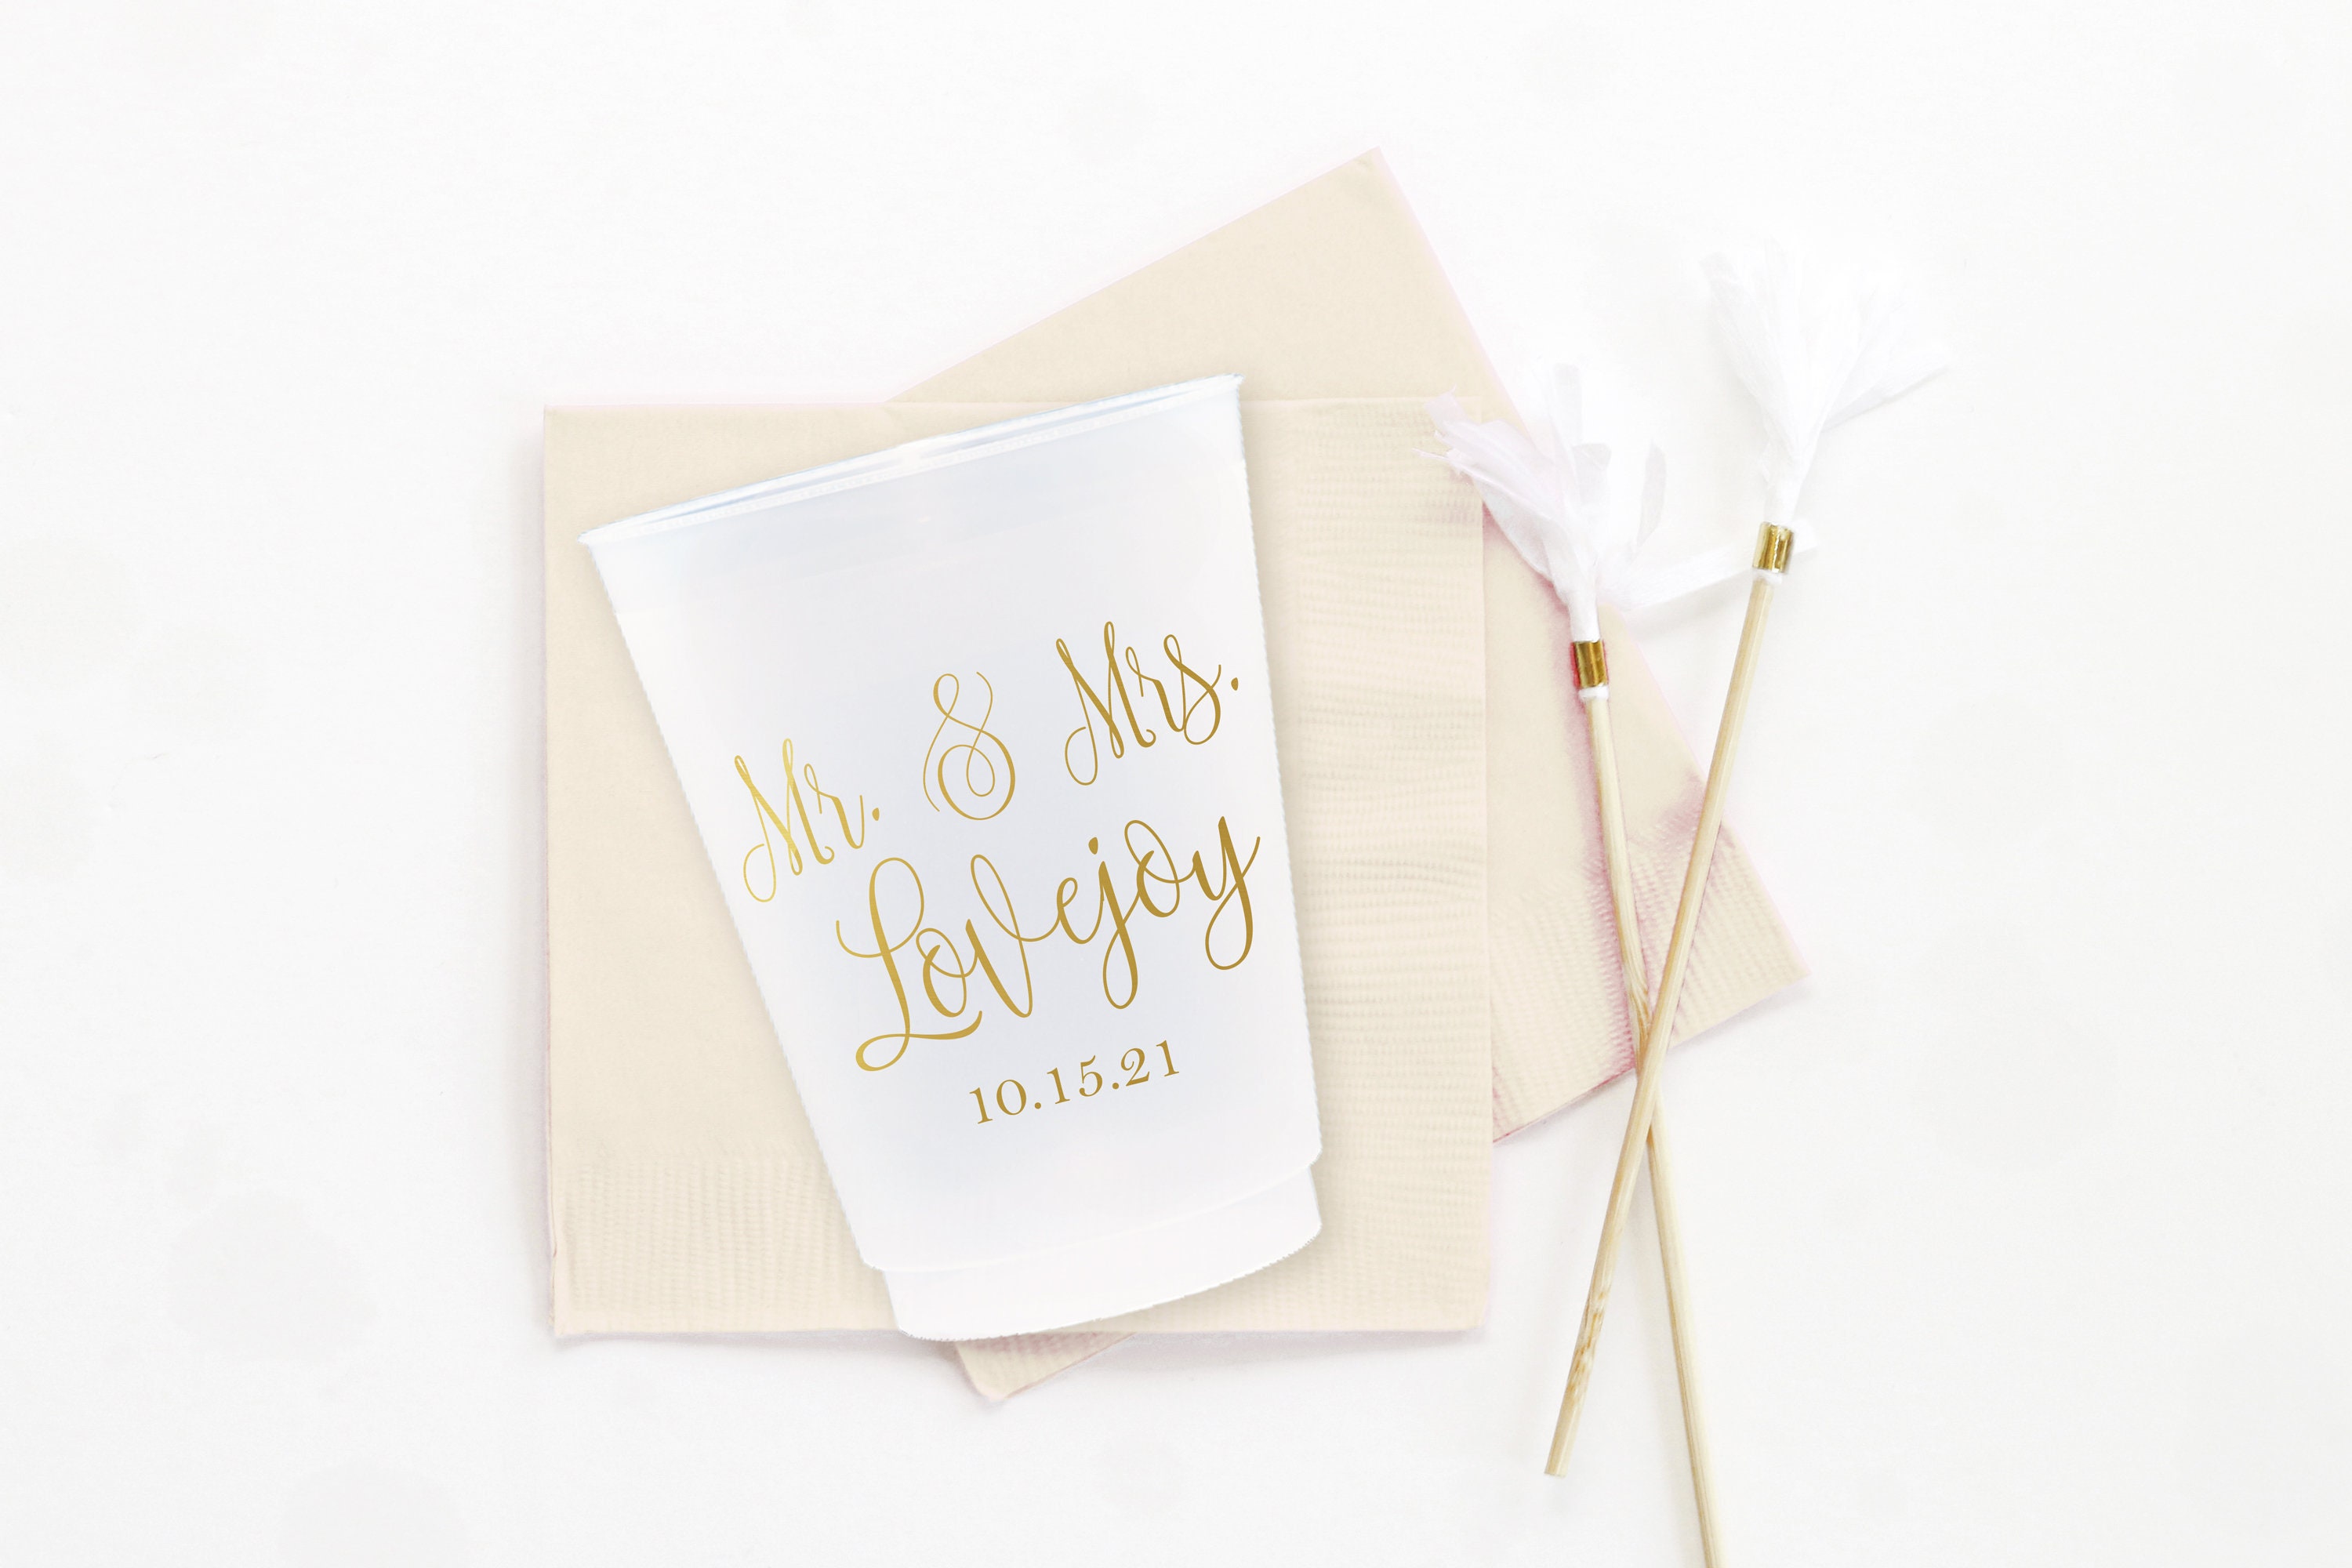 16 oz. Personalized White Mr. & Mrs. Disposable Plastic Cups – 40 Ct.